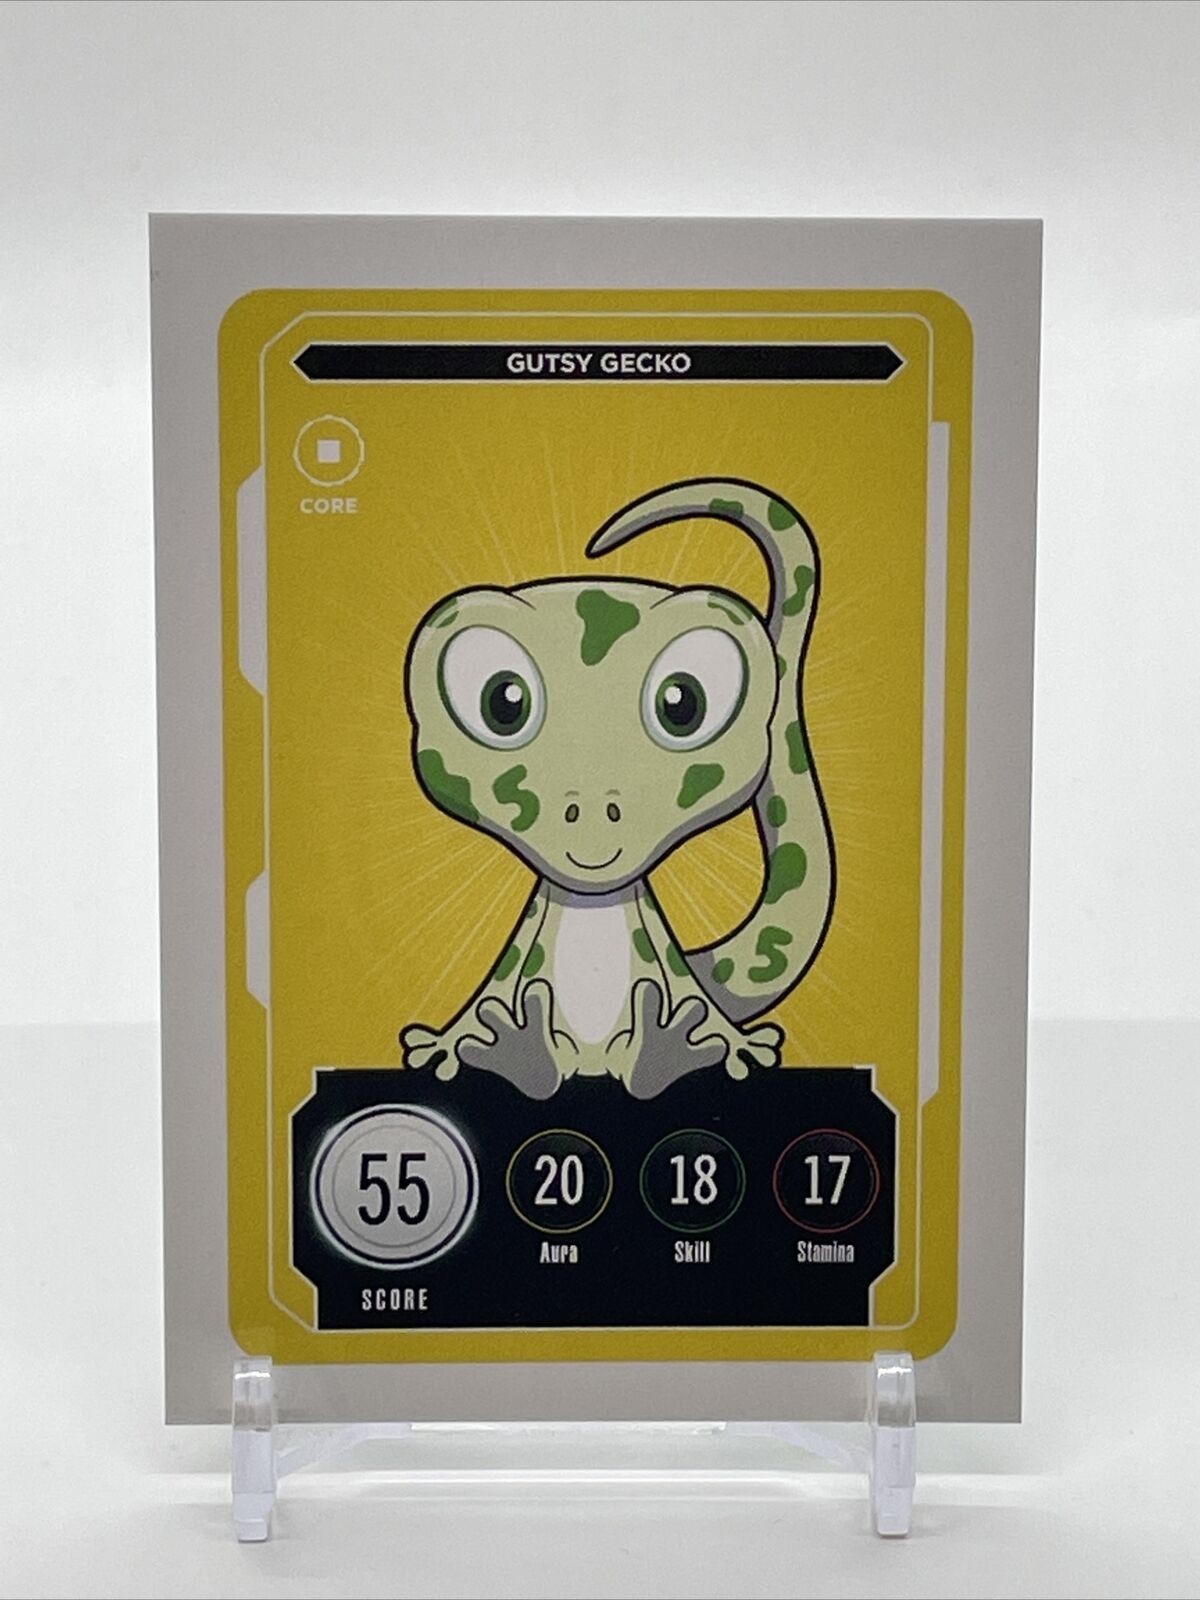 GUTSY GECKO VeeFriends Compete And Collect Card Core Series 2 ZeroCool Gary Vee